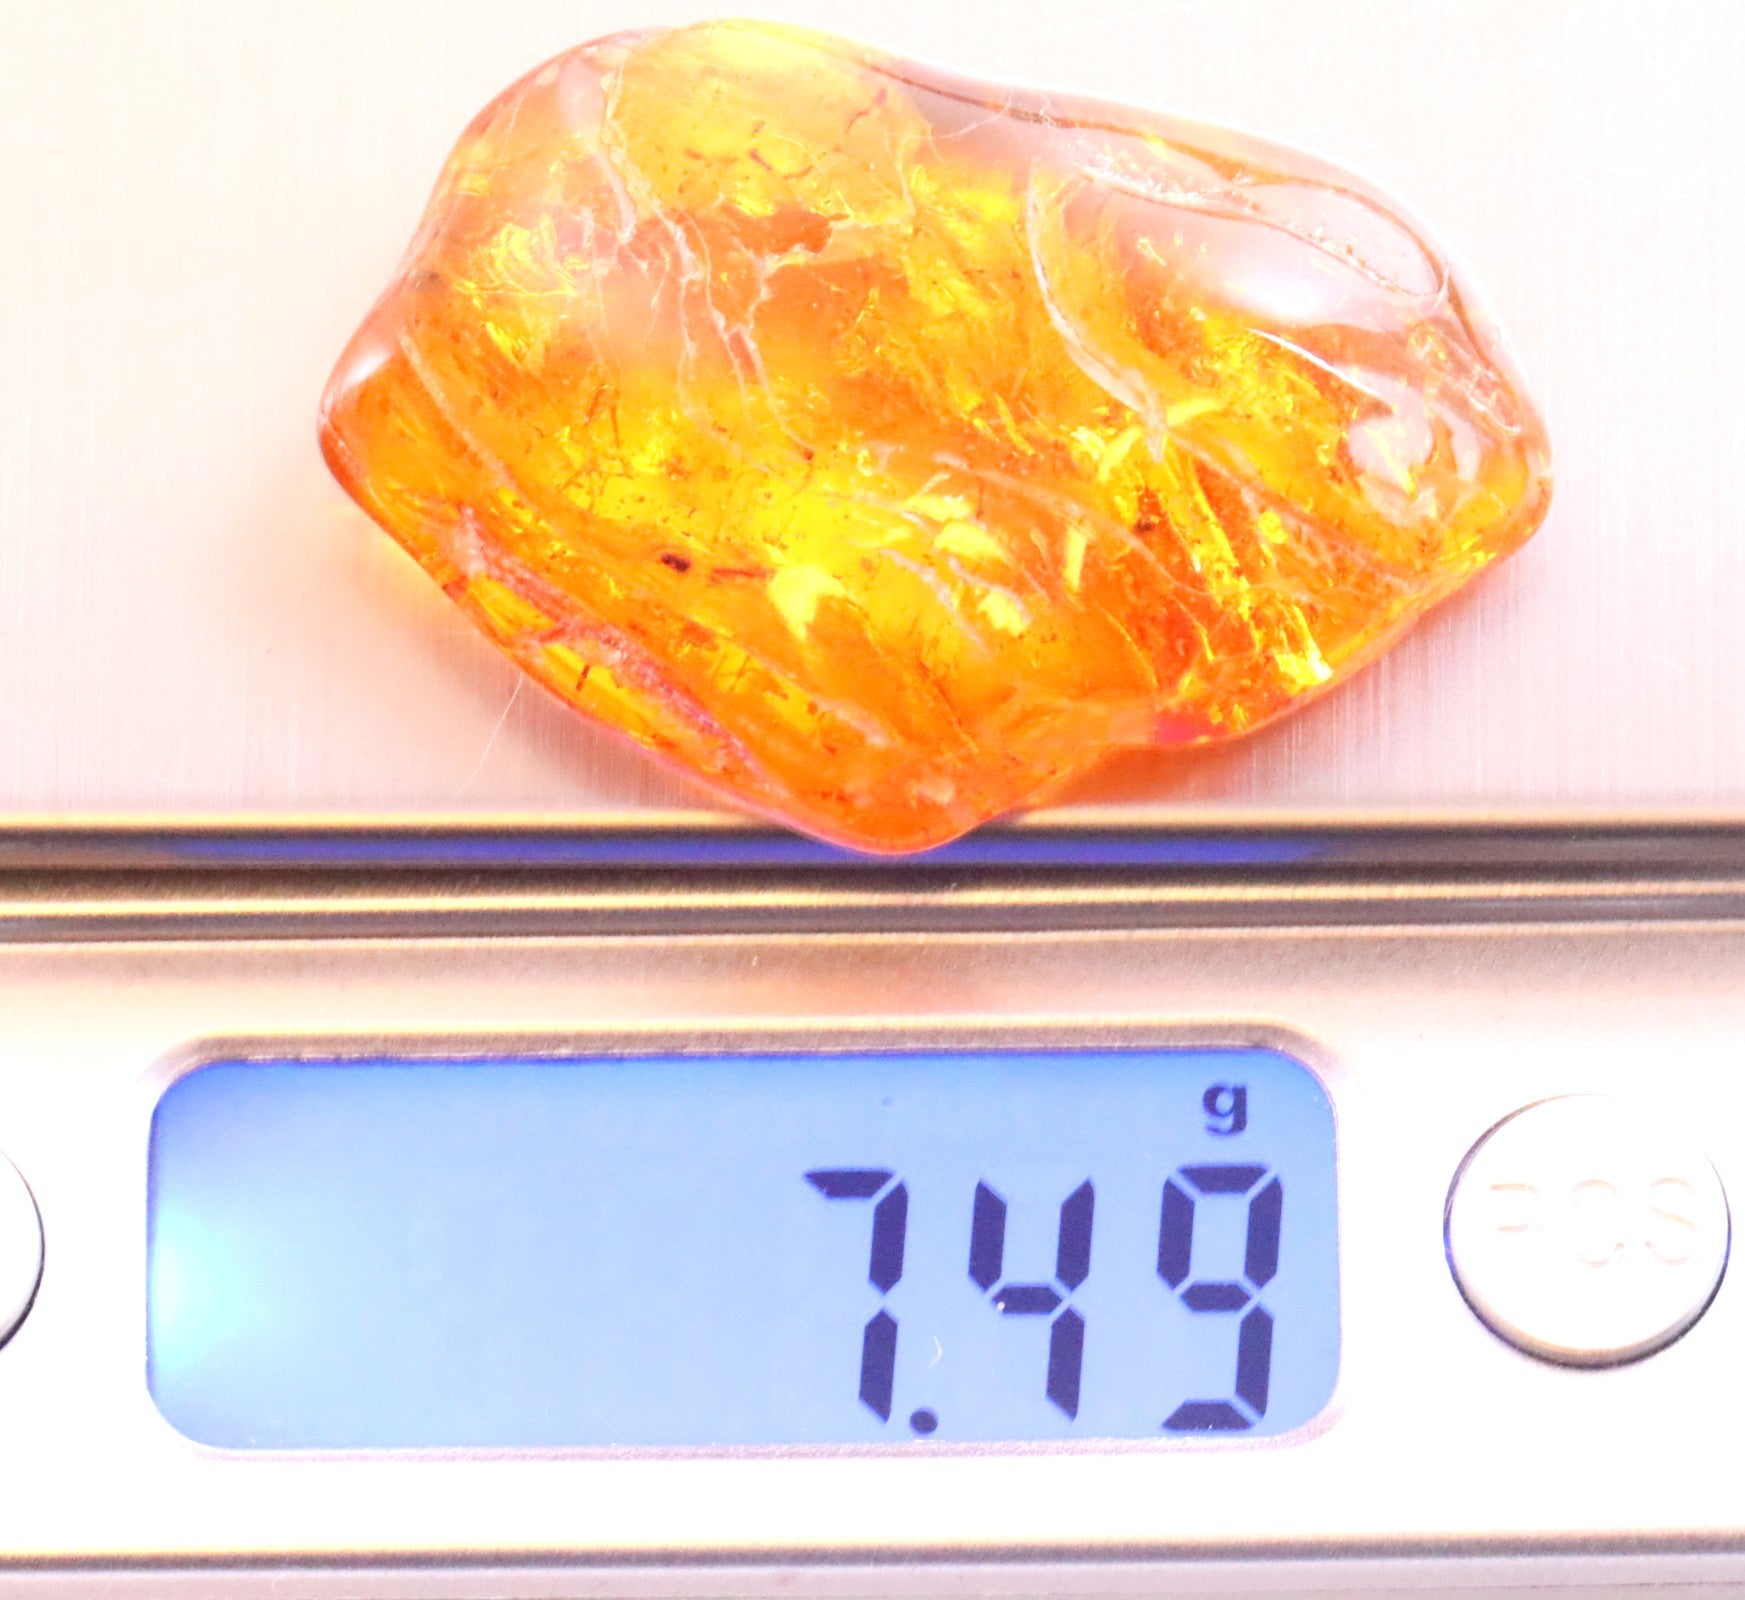 40 Million Year Old Baltic Amber With 7 X Insets in this piece